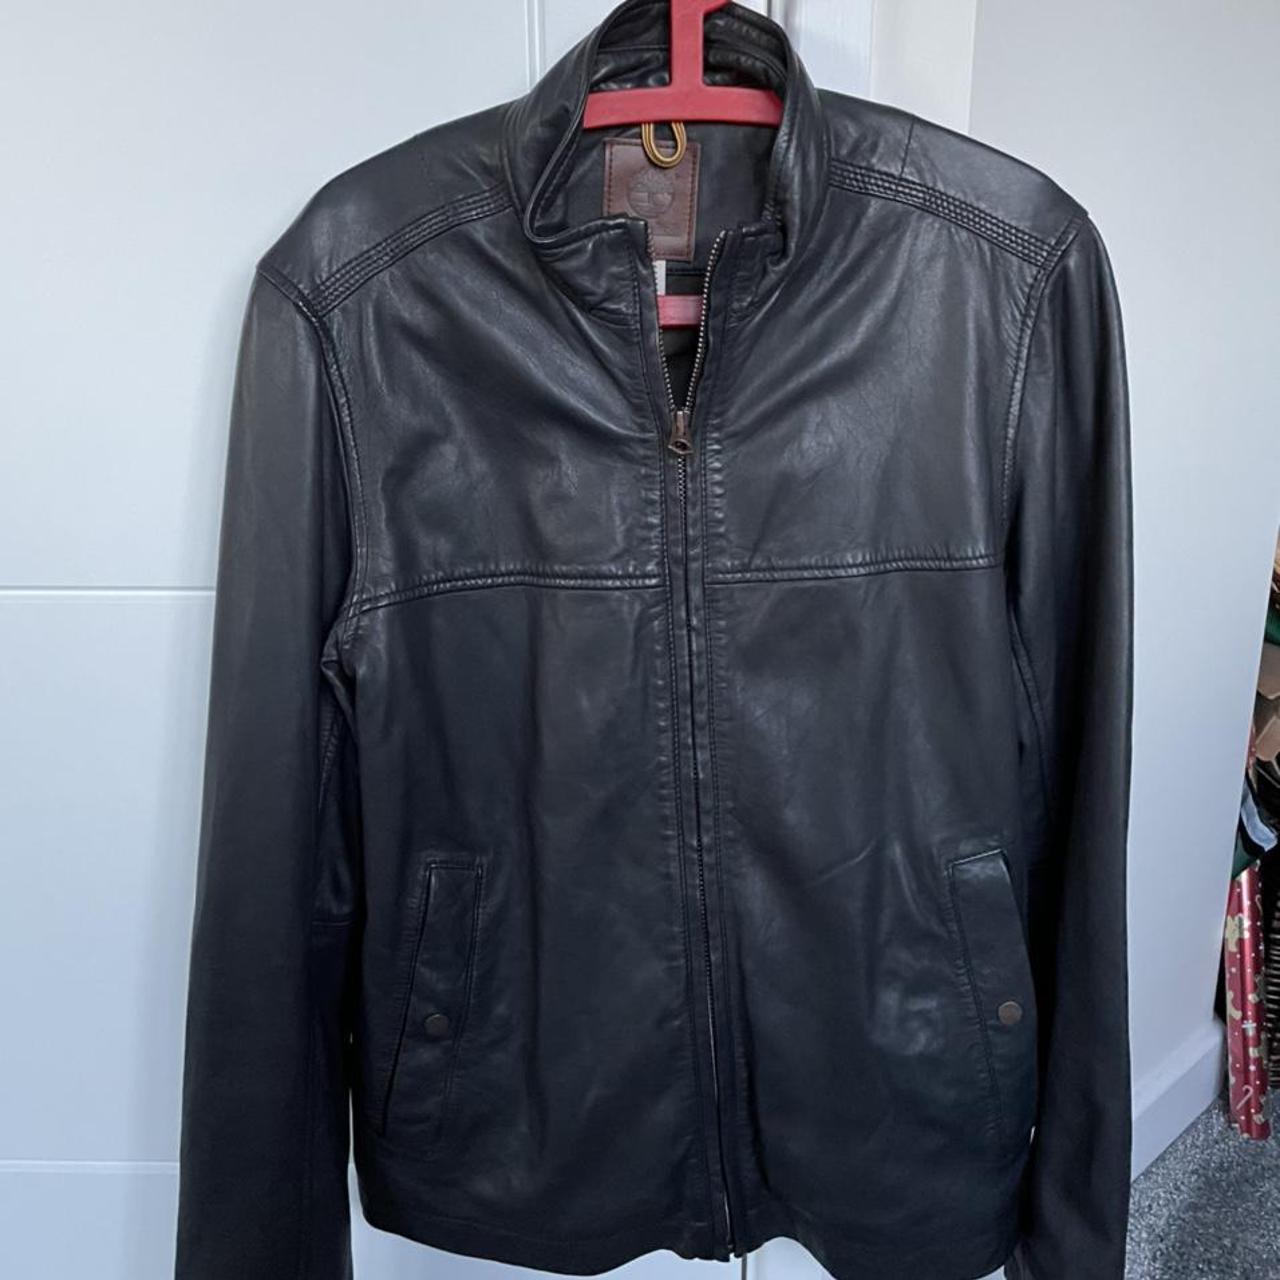 Product Image 1 - Mens timberland leather jacket in